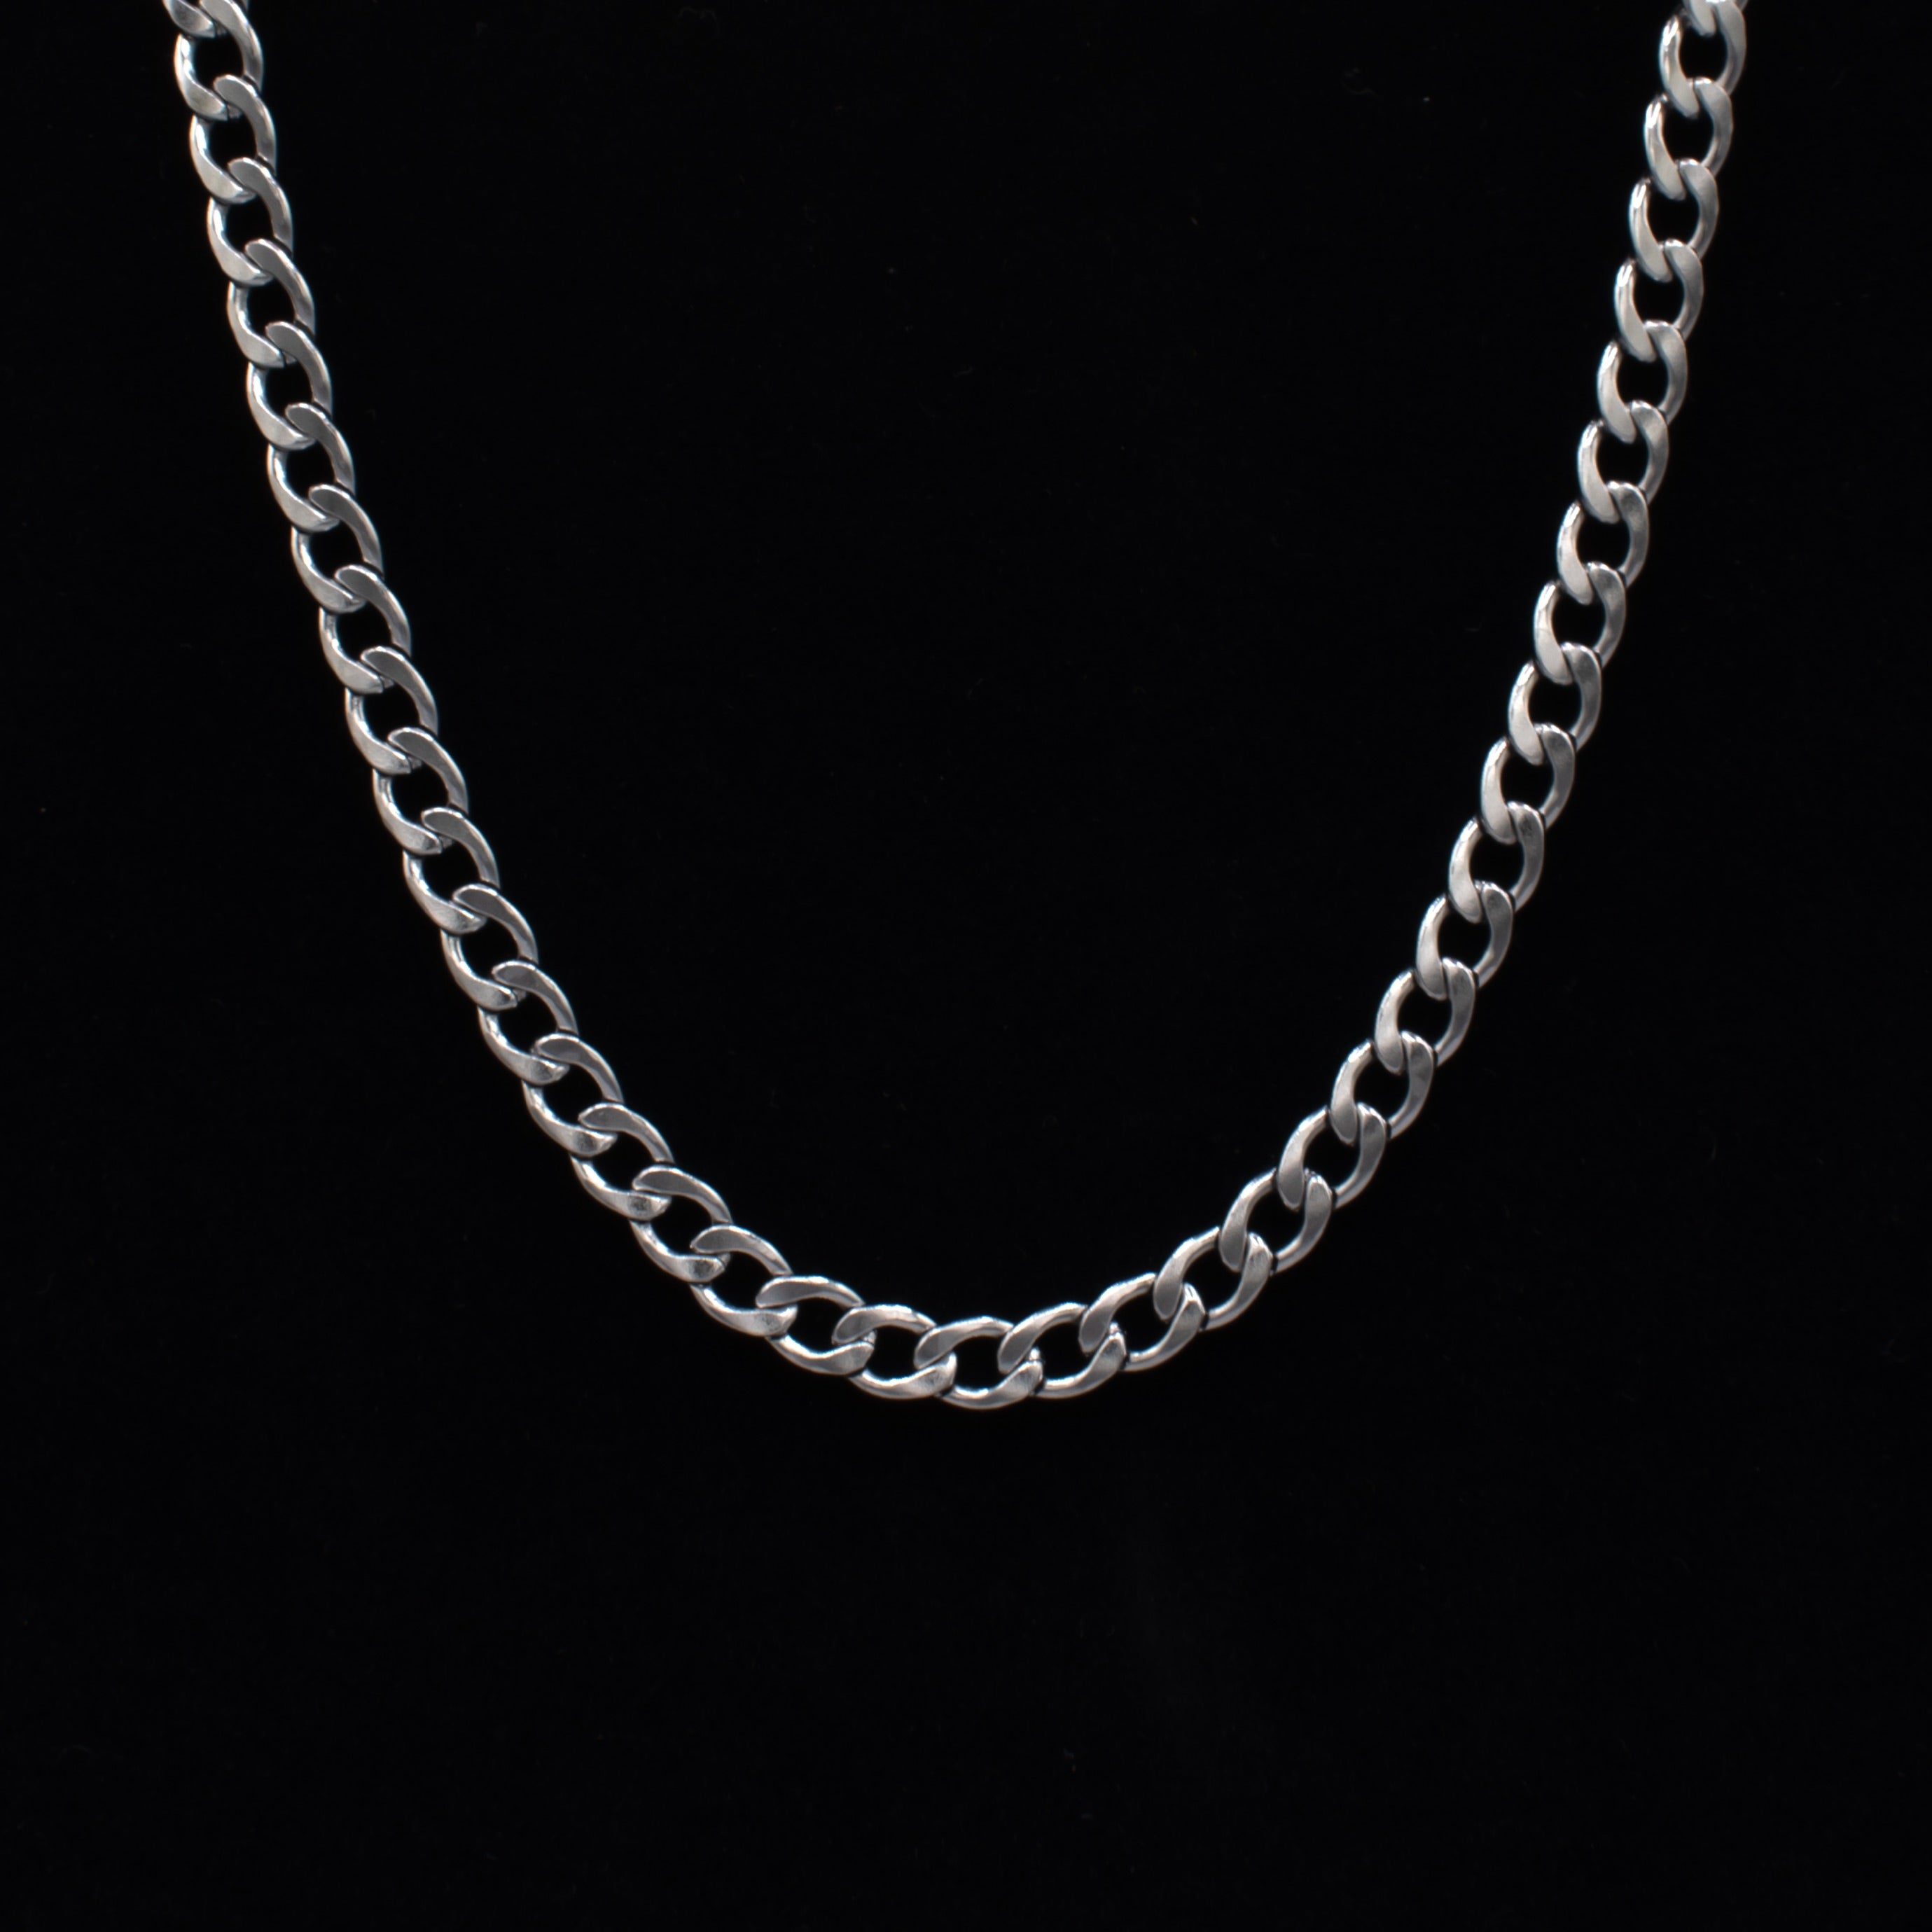 7mm stainless steel necklace